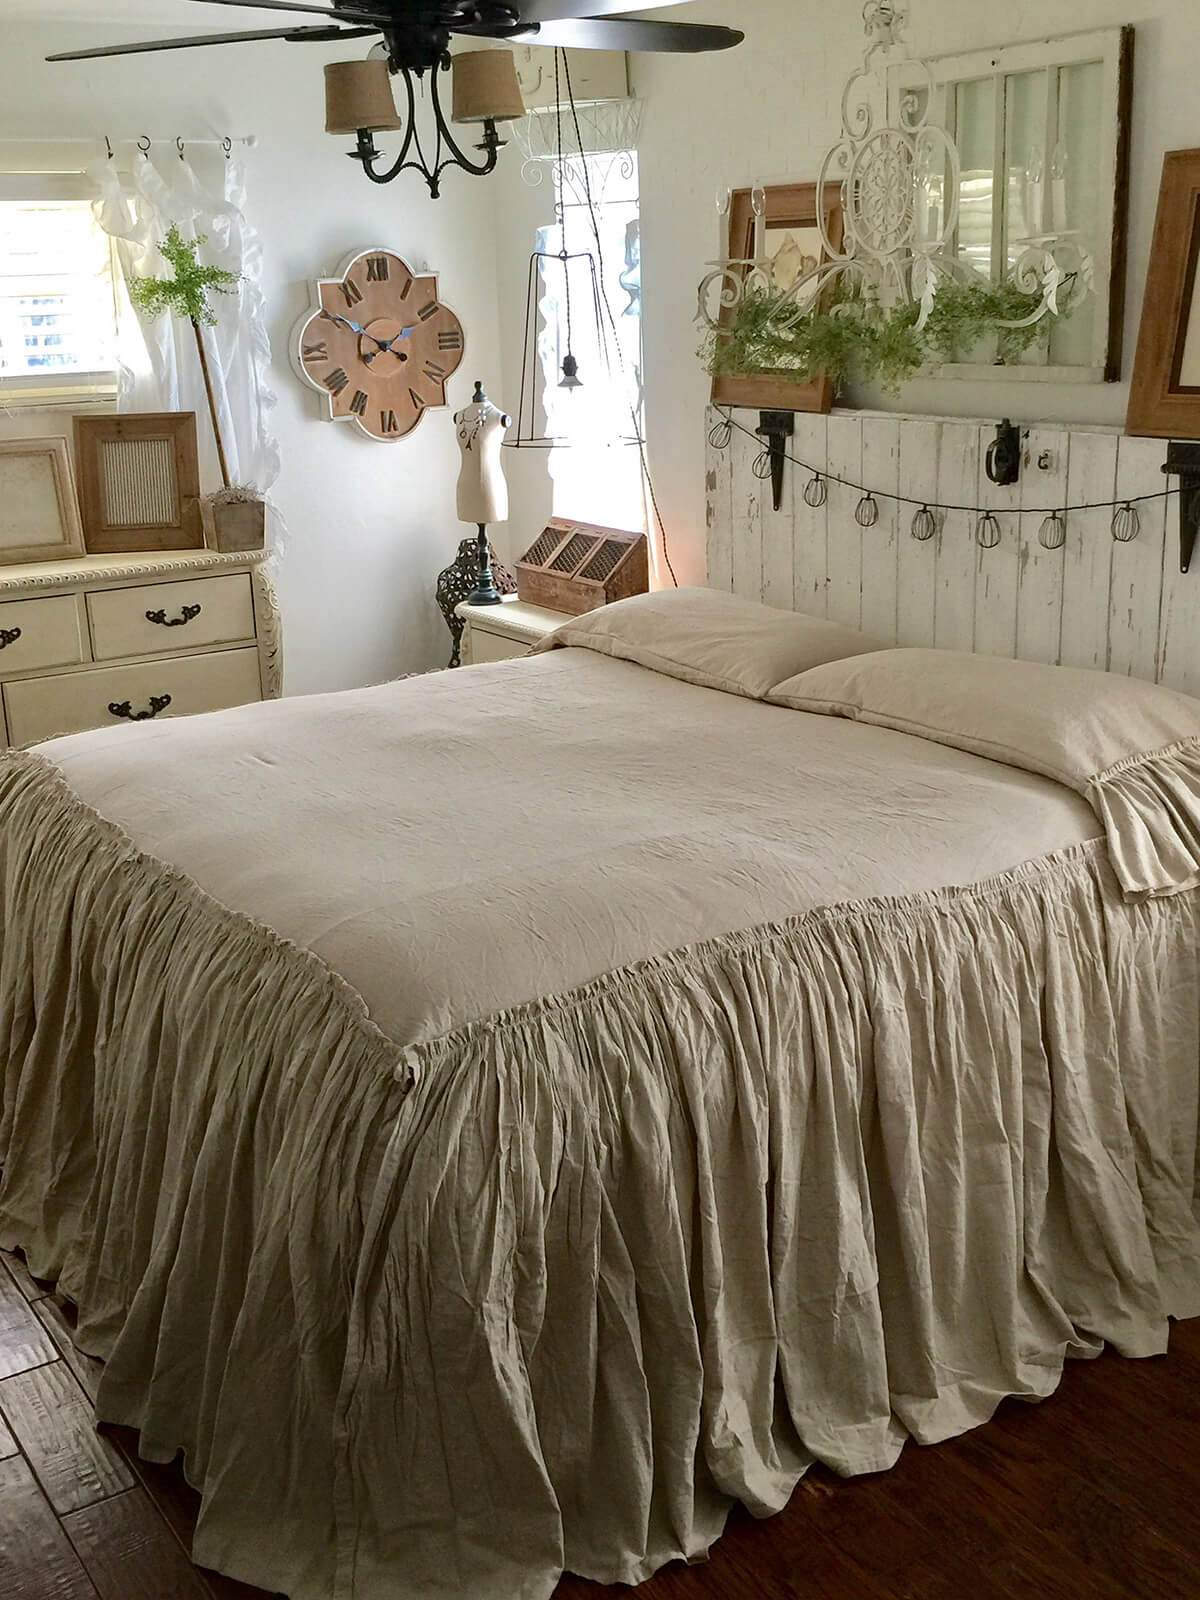 Rustic Wood and Ruffled Bedspreads